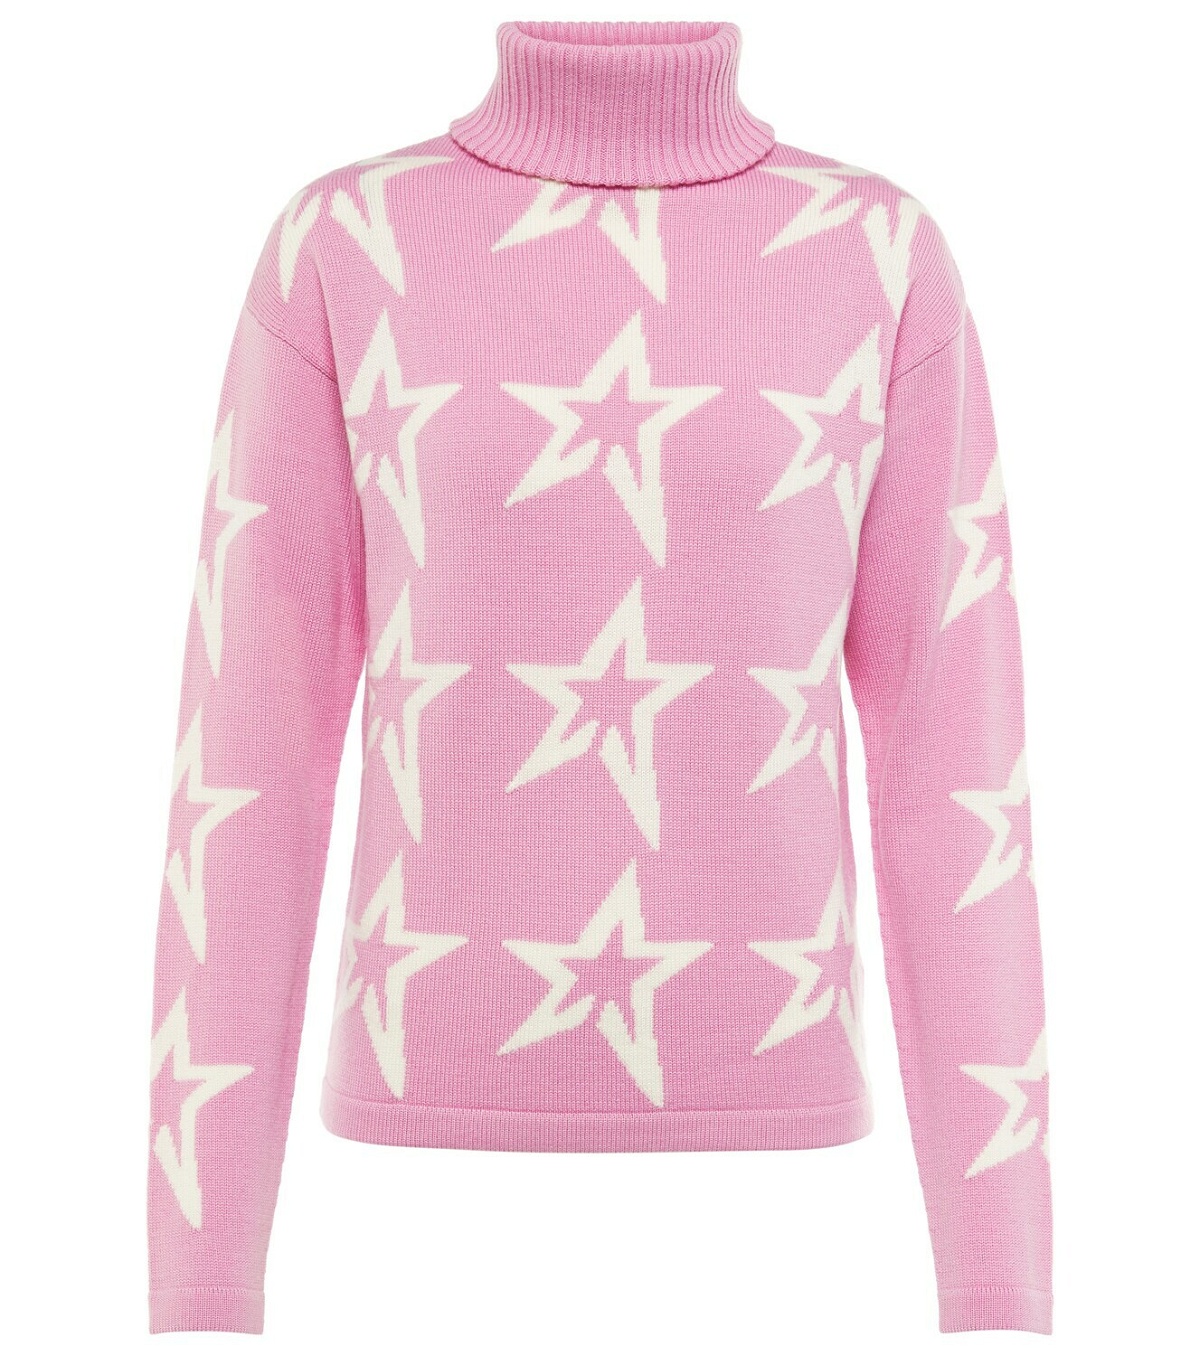 Perfect Moment Star Dust intarsia wool sweater Perfect Moment